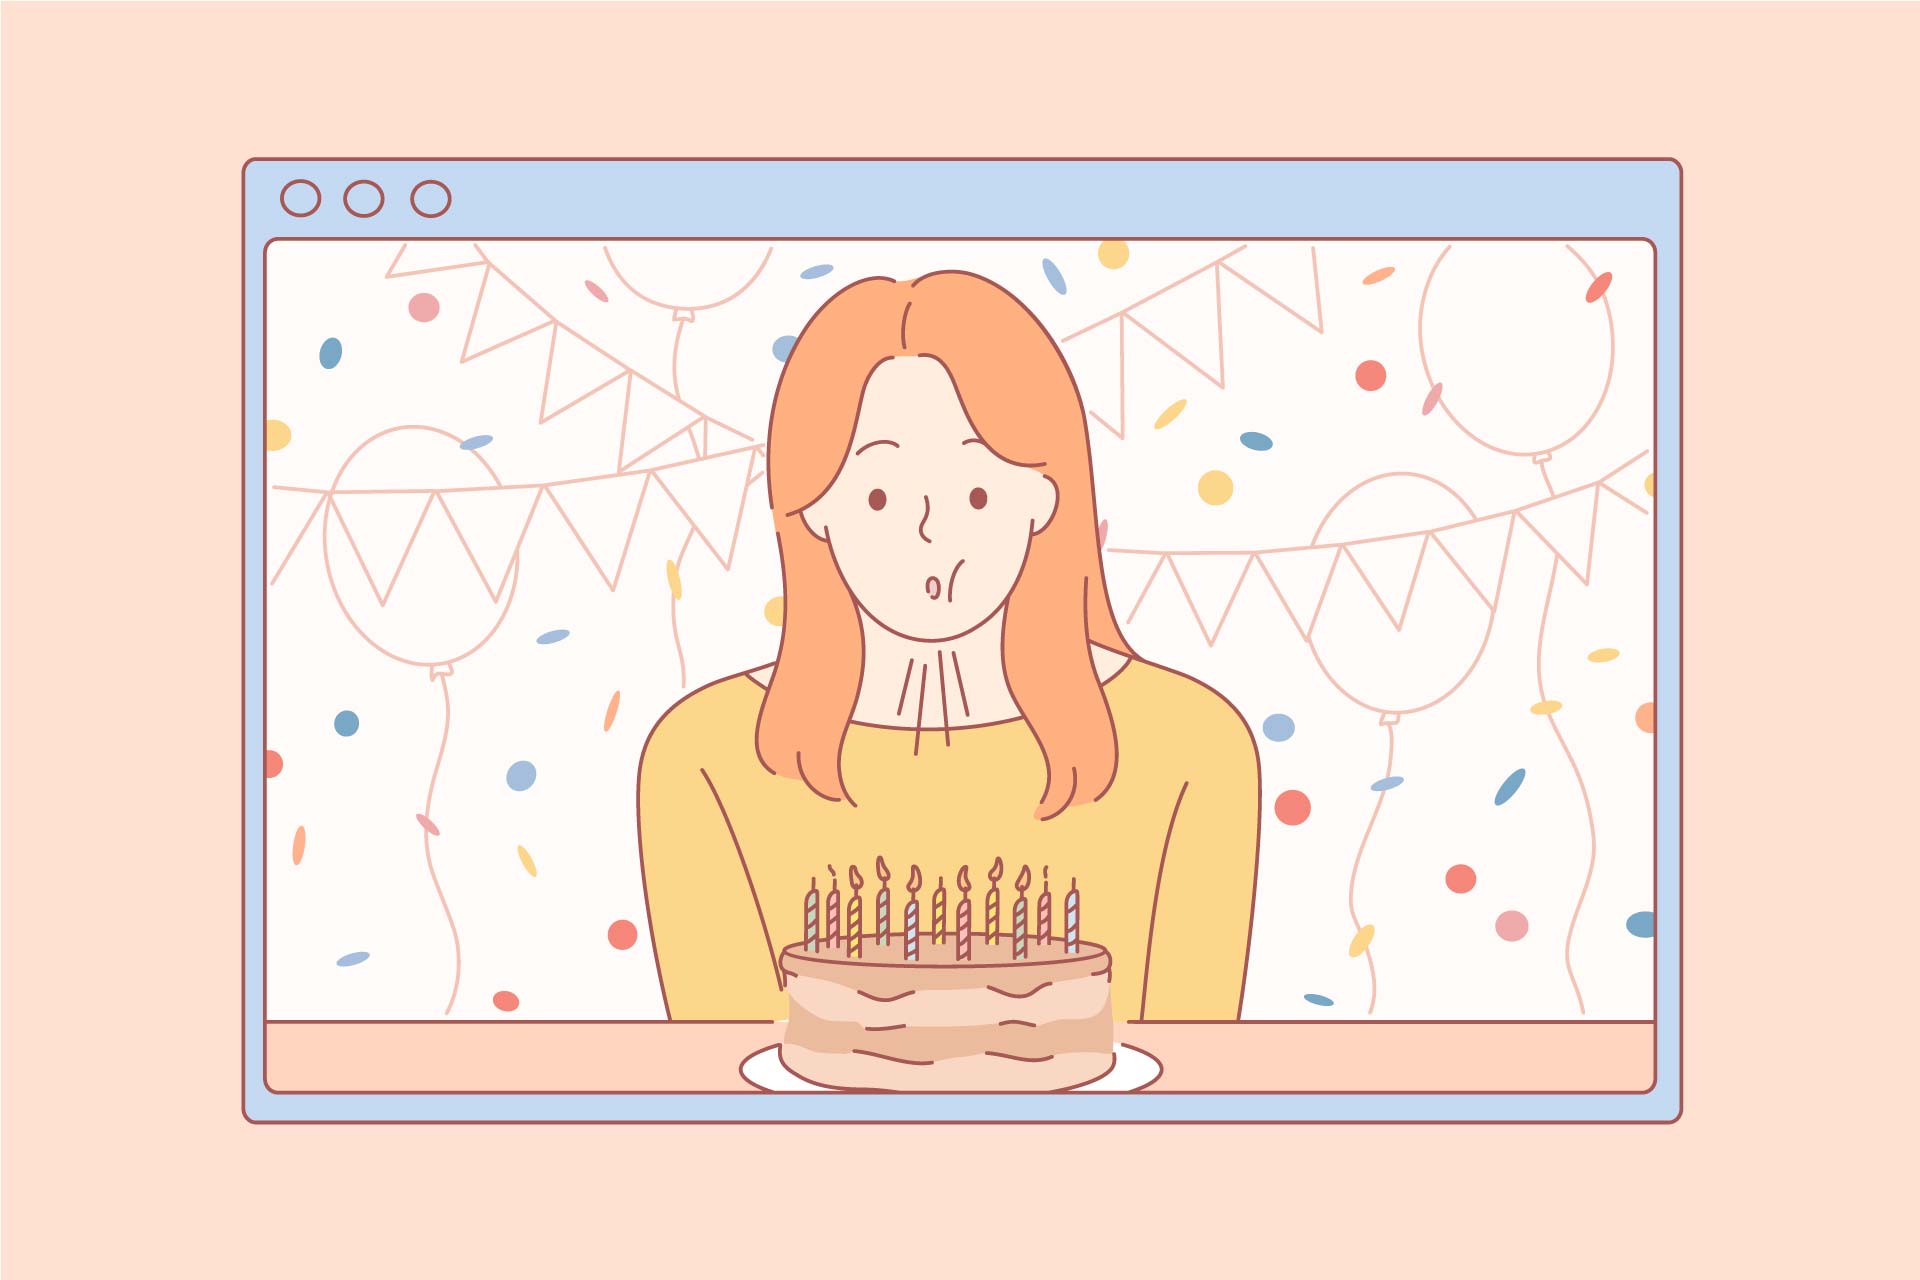 Cartoon woman with orange hair and yellow shirt blowing out candles on a birthday cake with party decorations behind her.